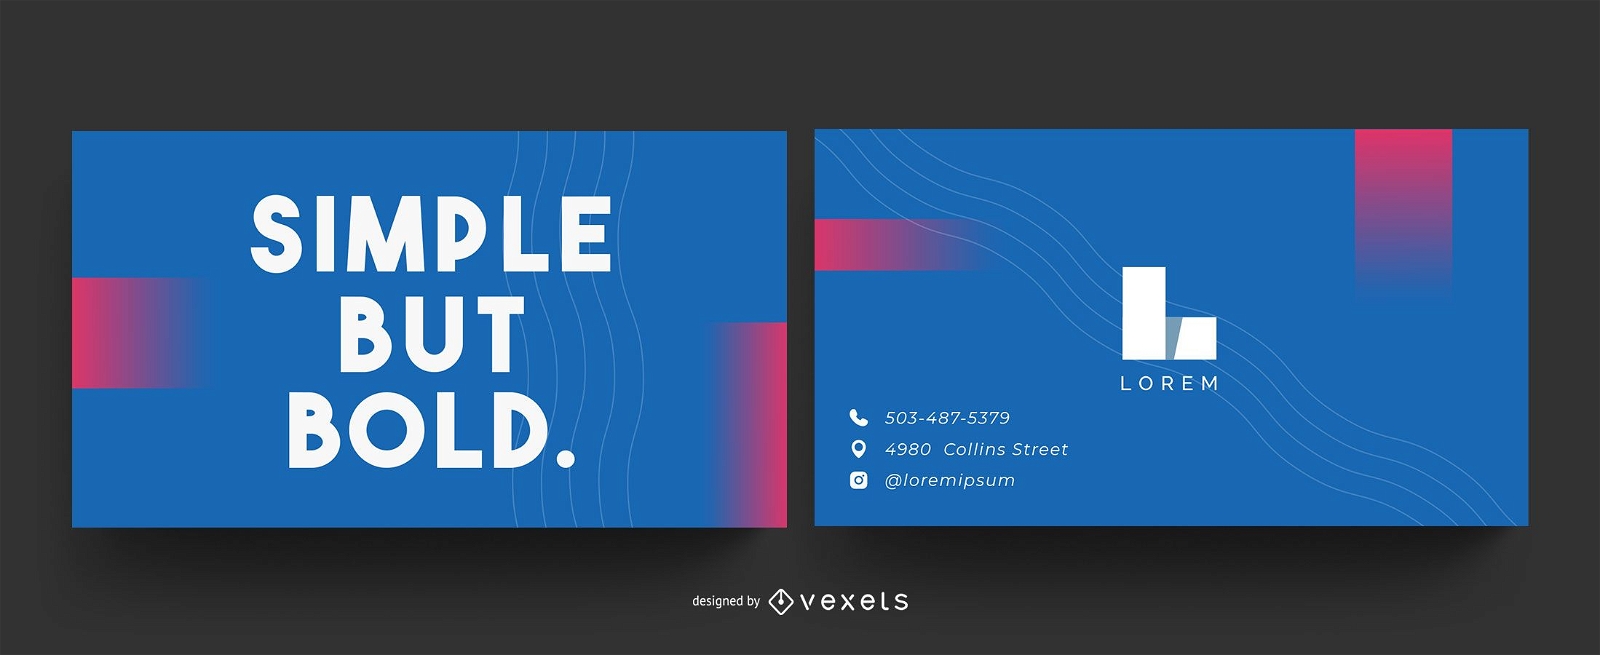 Simple but bold business card